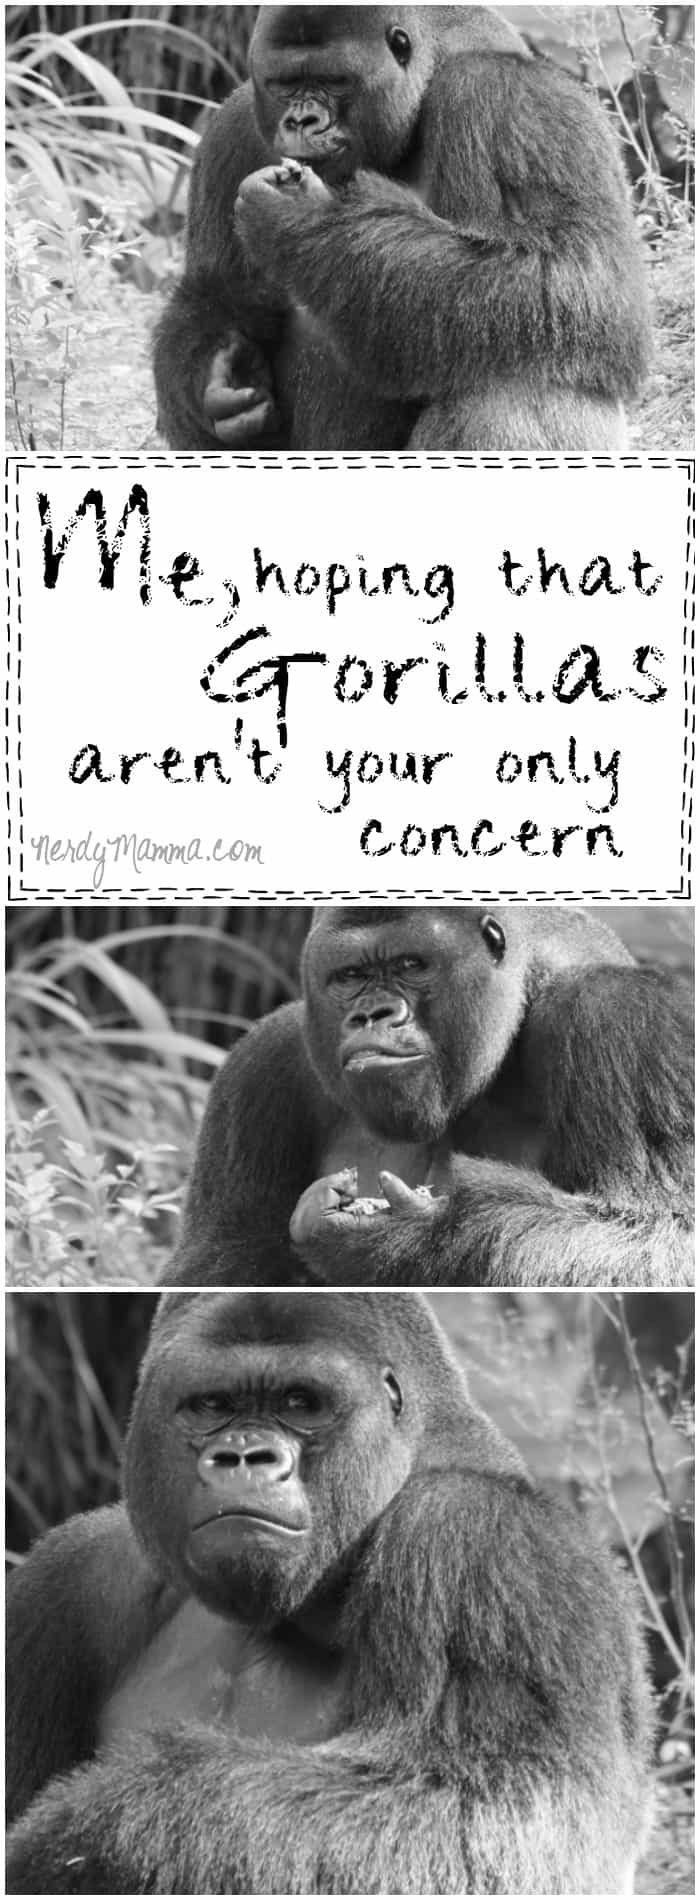 This mom's perspective on this gorilla situation...I kind of agree with her...